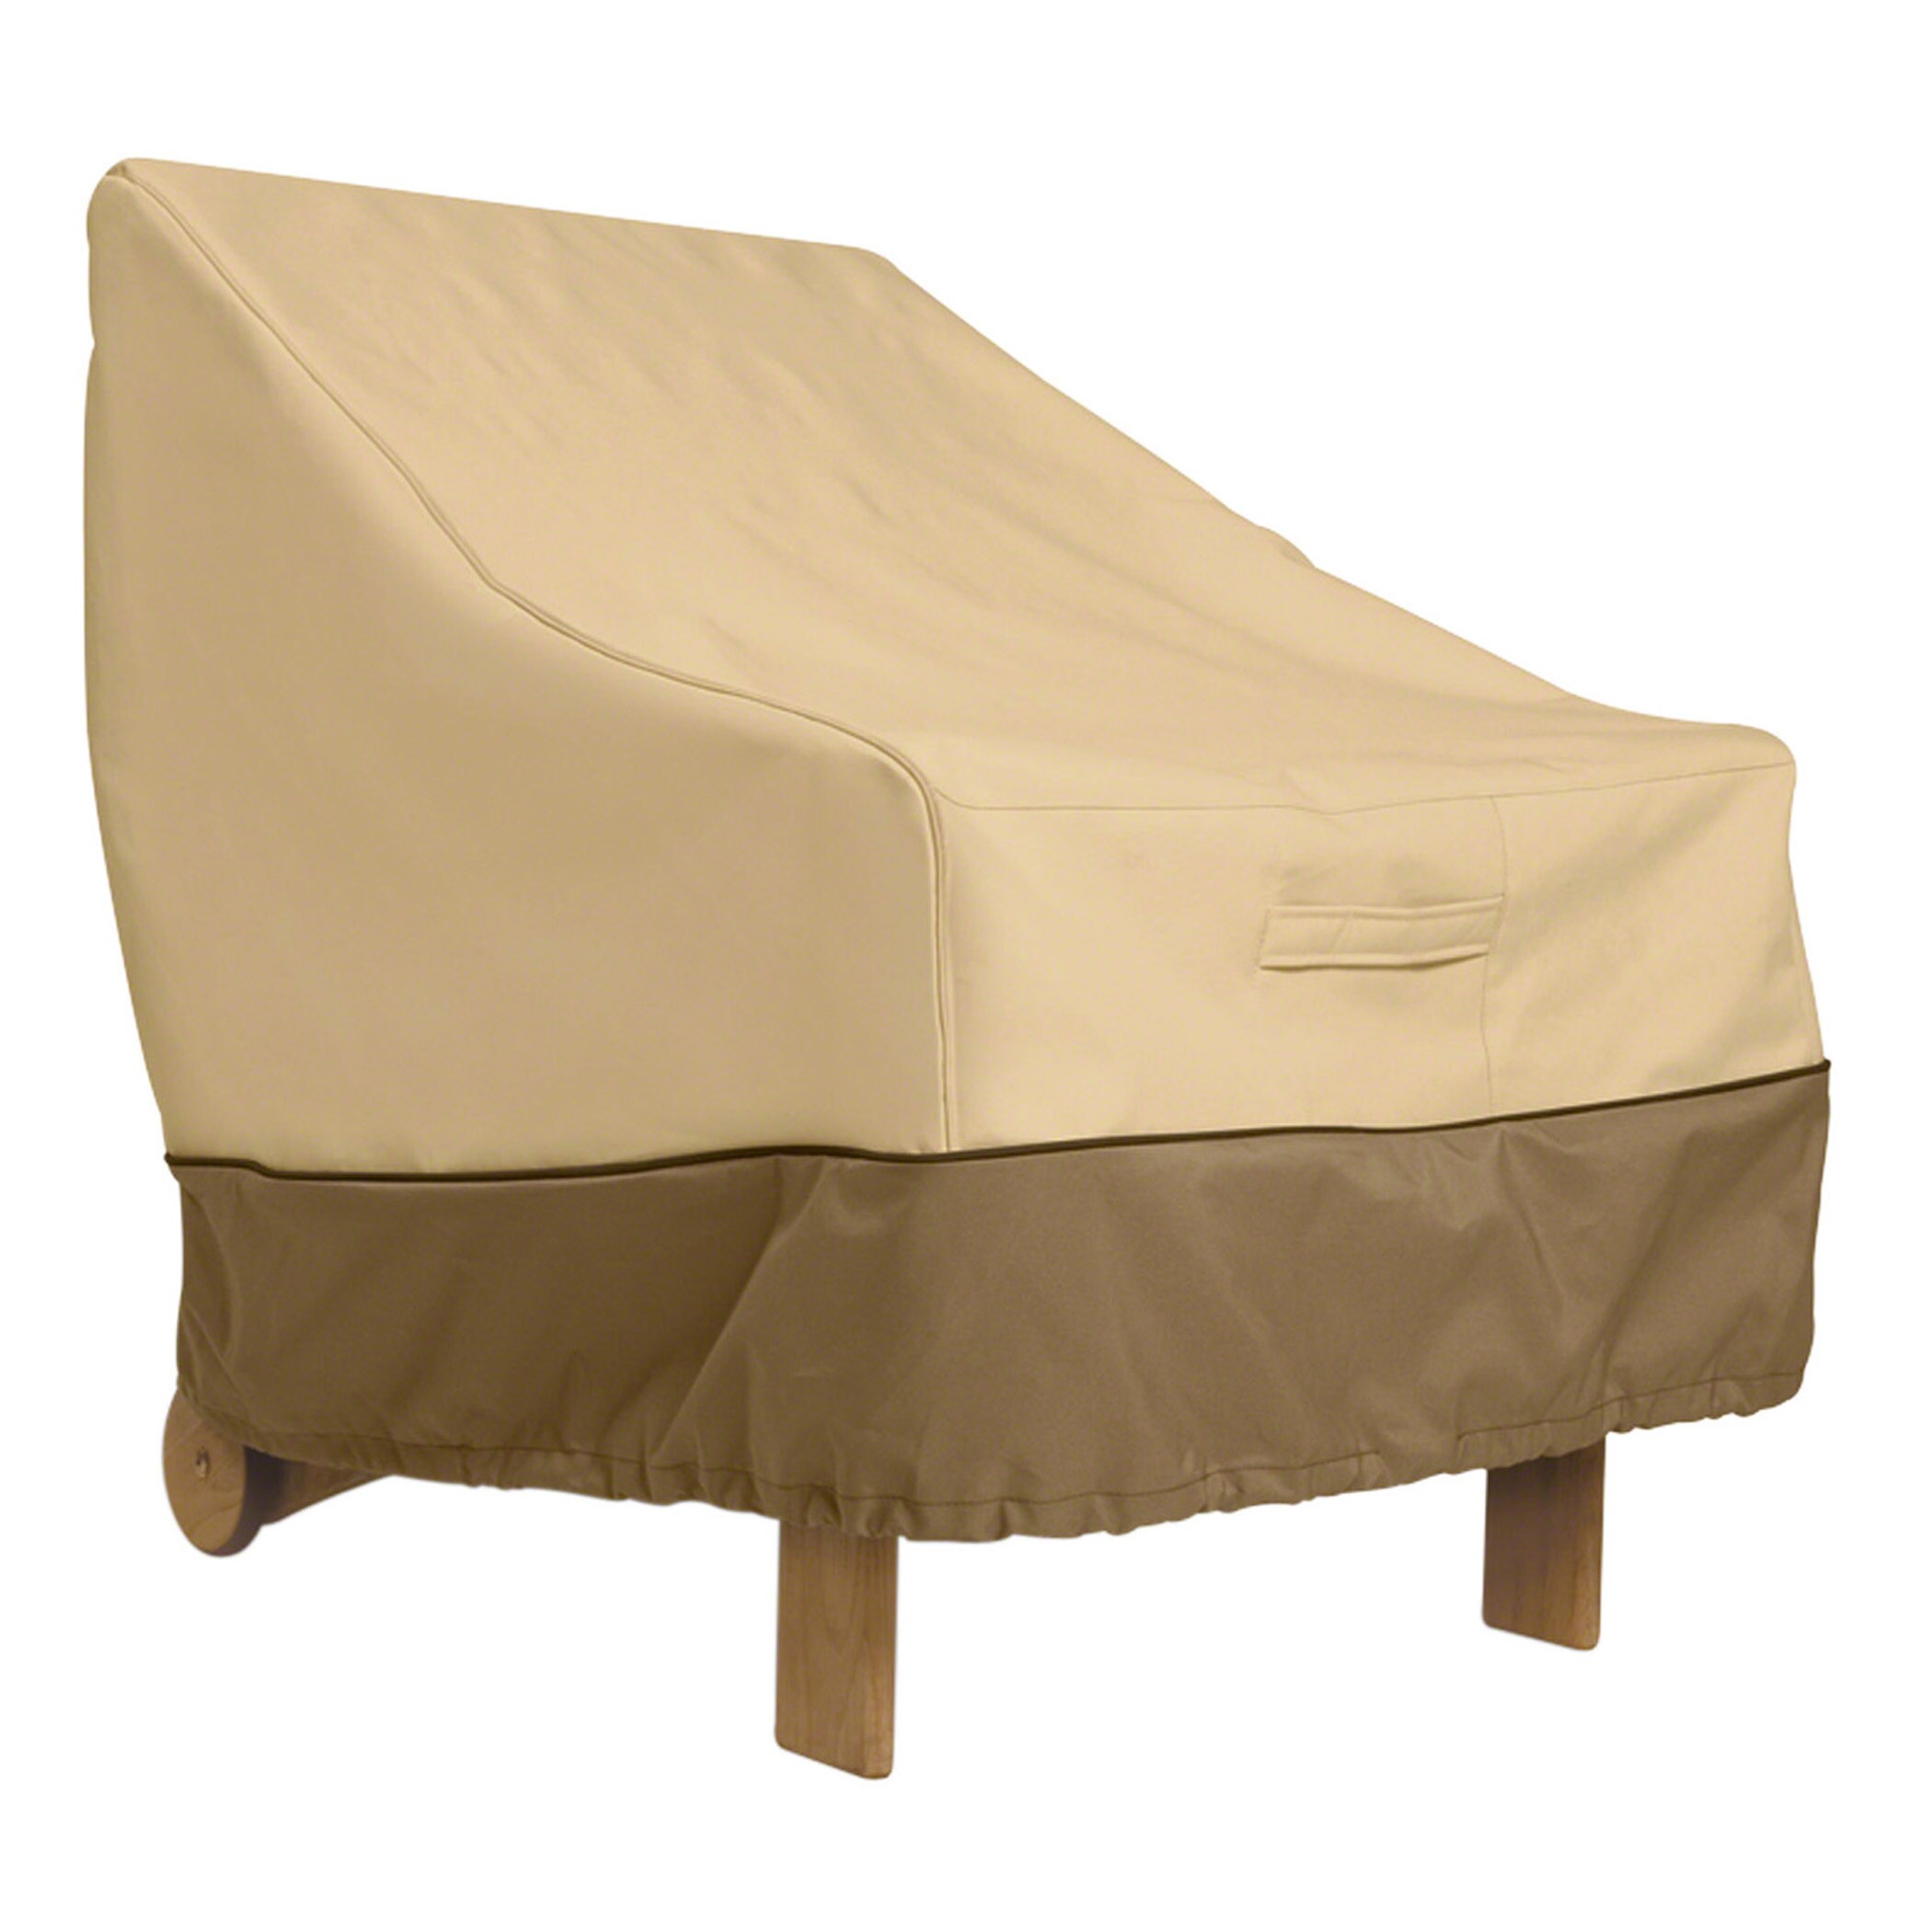 Classic Accessories Veranda Pebble And Bark Polyester Patio Furniture Cover In The Patio Furniture Covers Department At Lowes Com